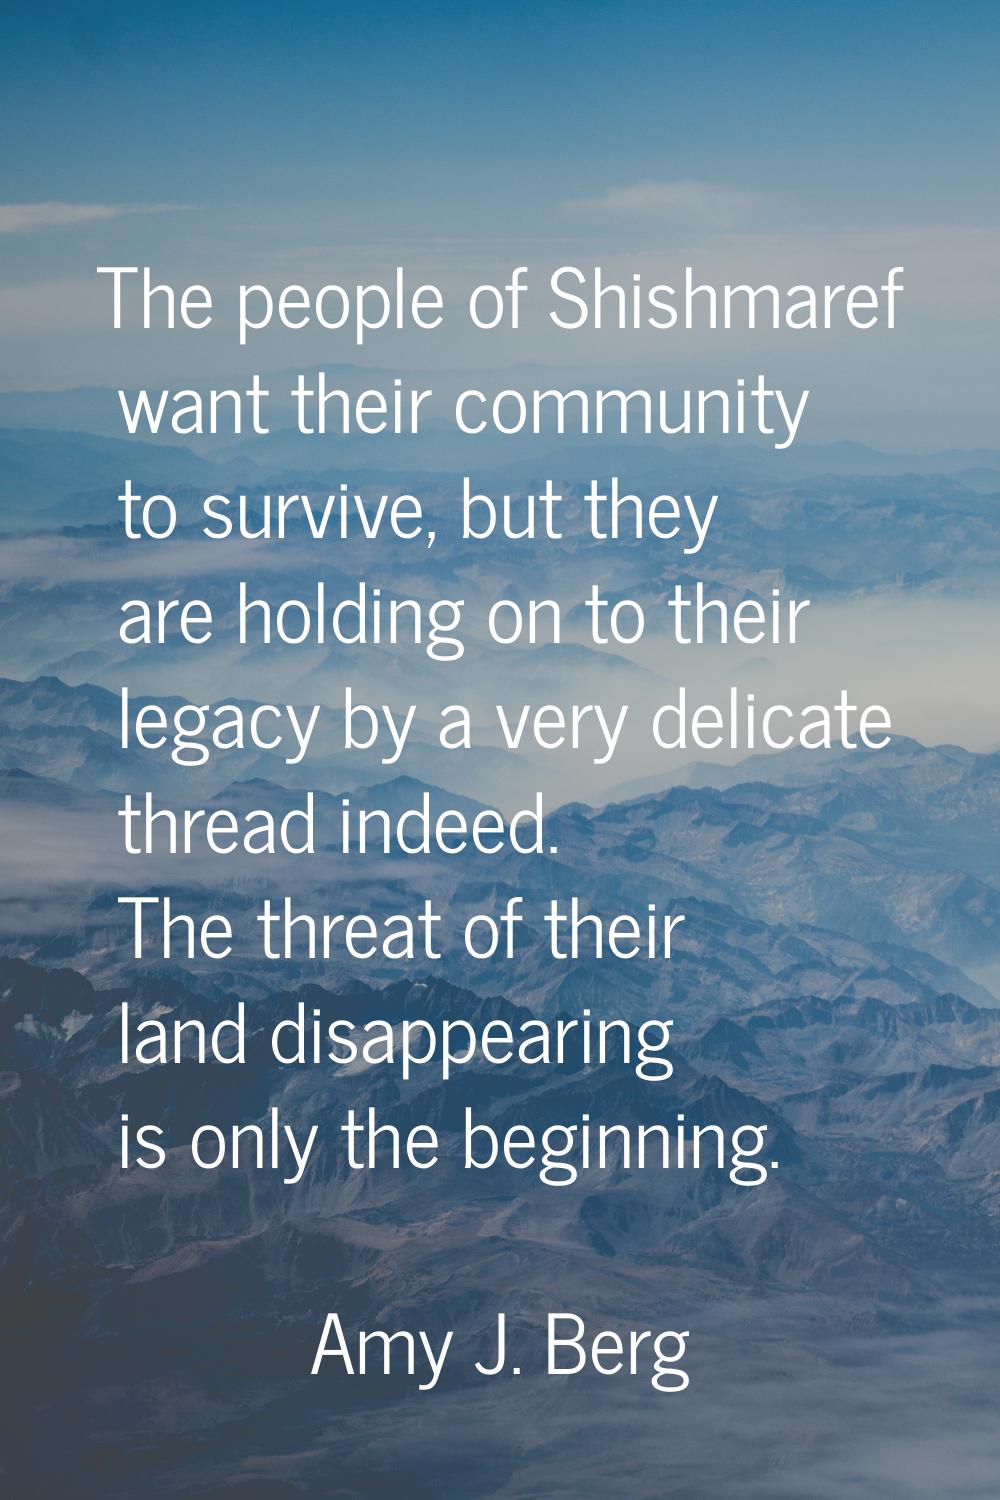 The people of Shishmaref want their community to survive, but they are holding on to their legacy b